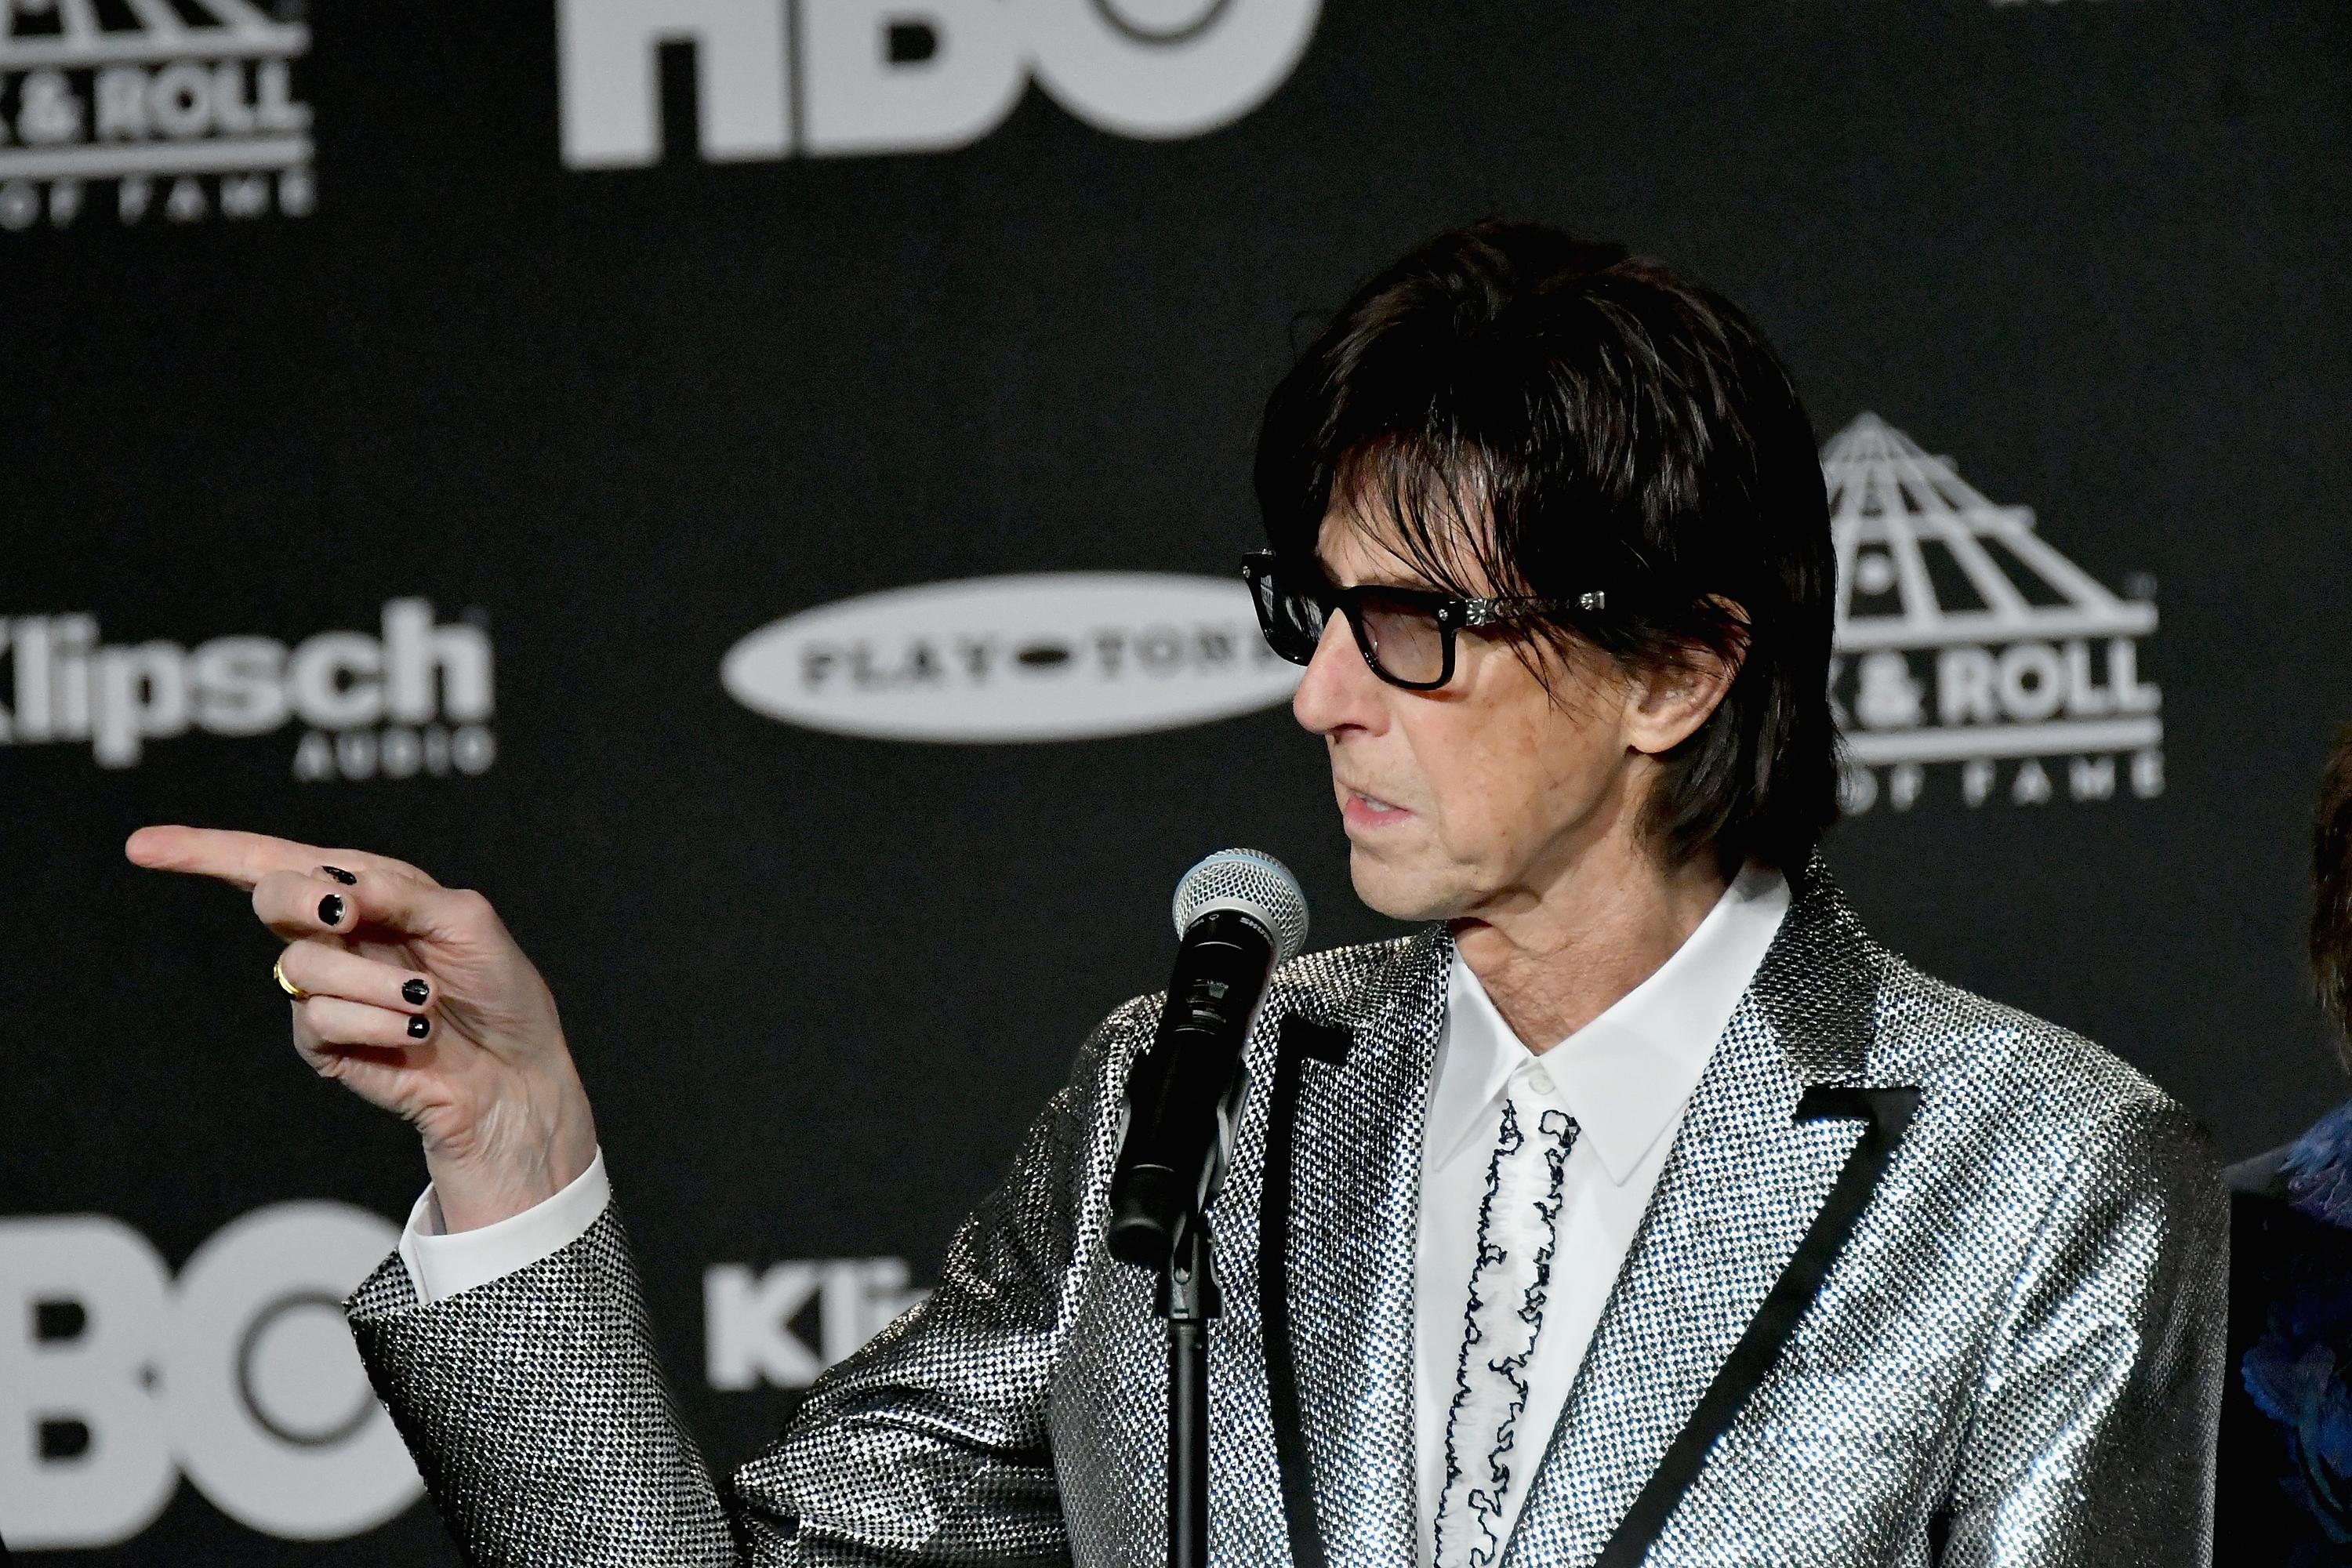 Ric Ocasek of the Cars points his finger at something off-camera at the Rock and Roll Hall of Fame.